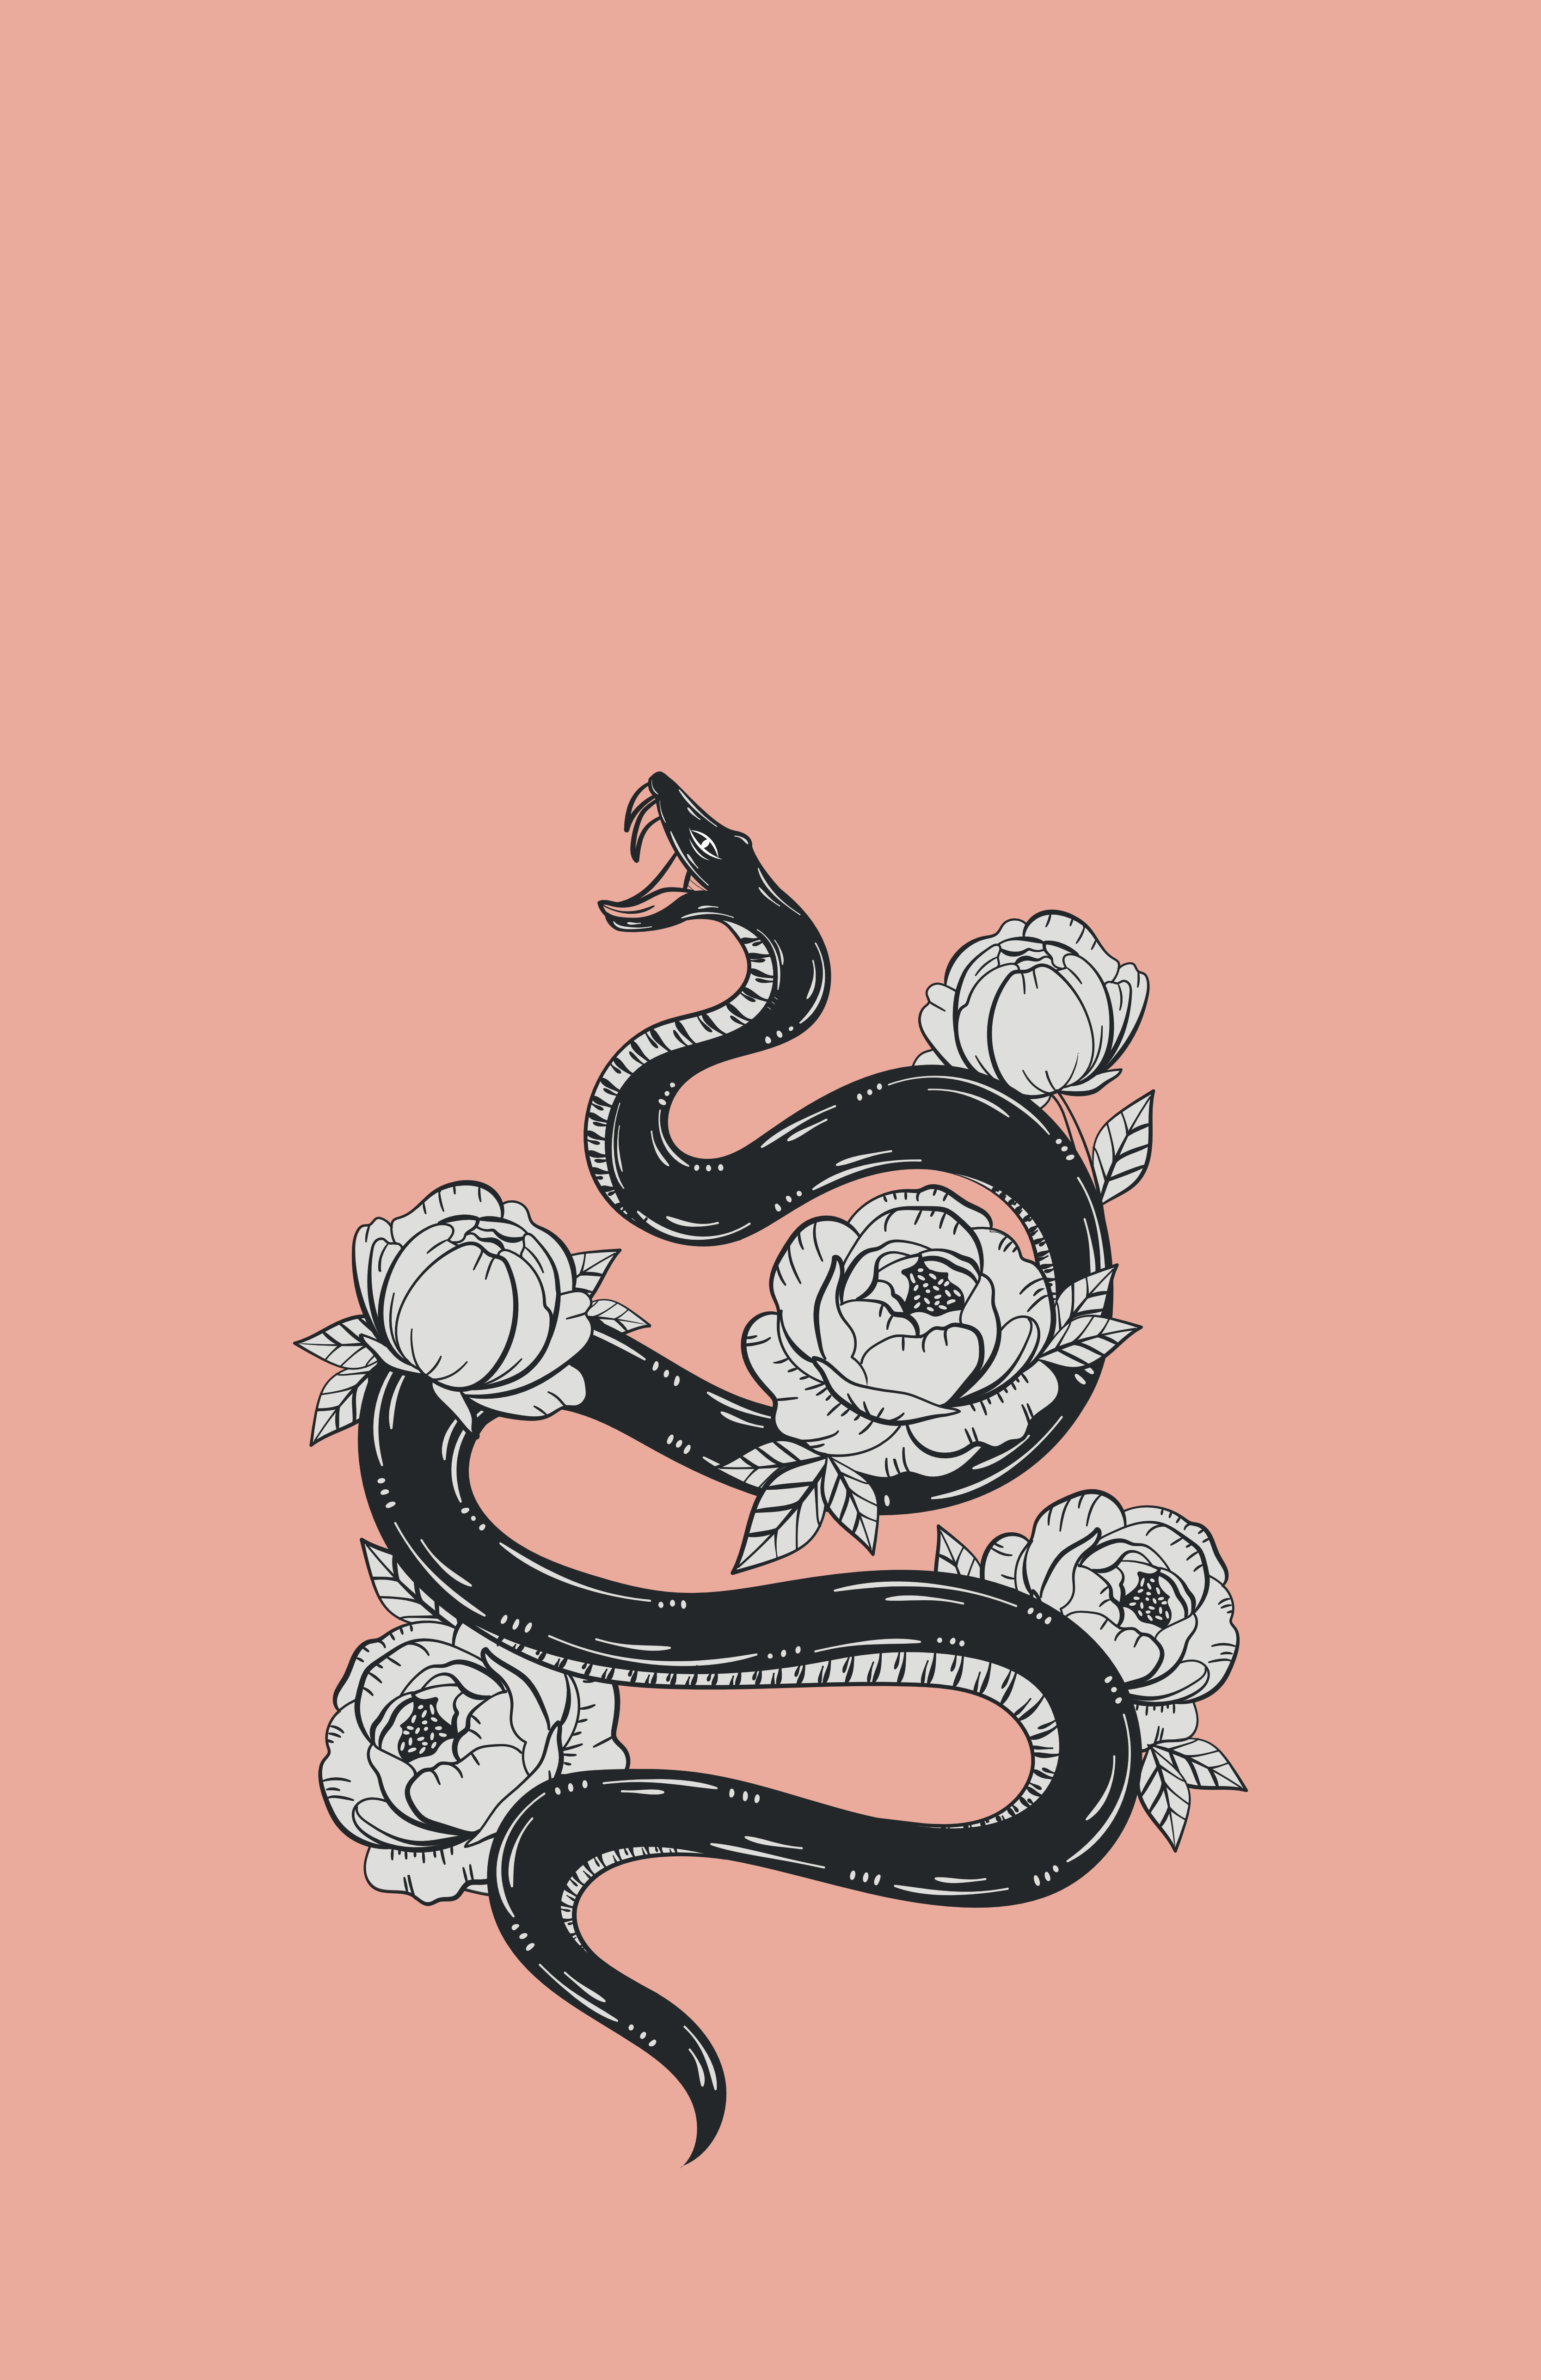 A snake with flowers on it - Snake